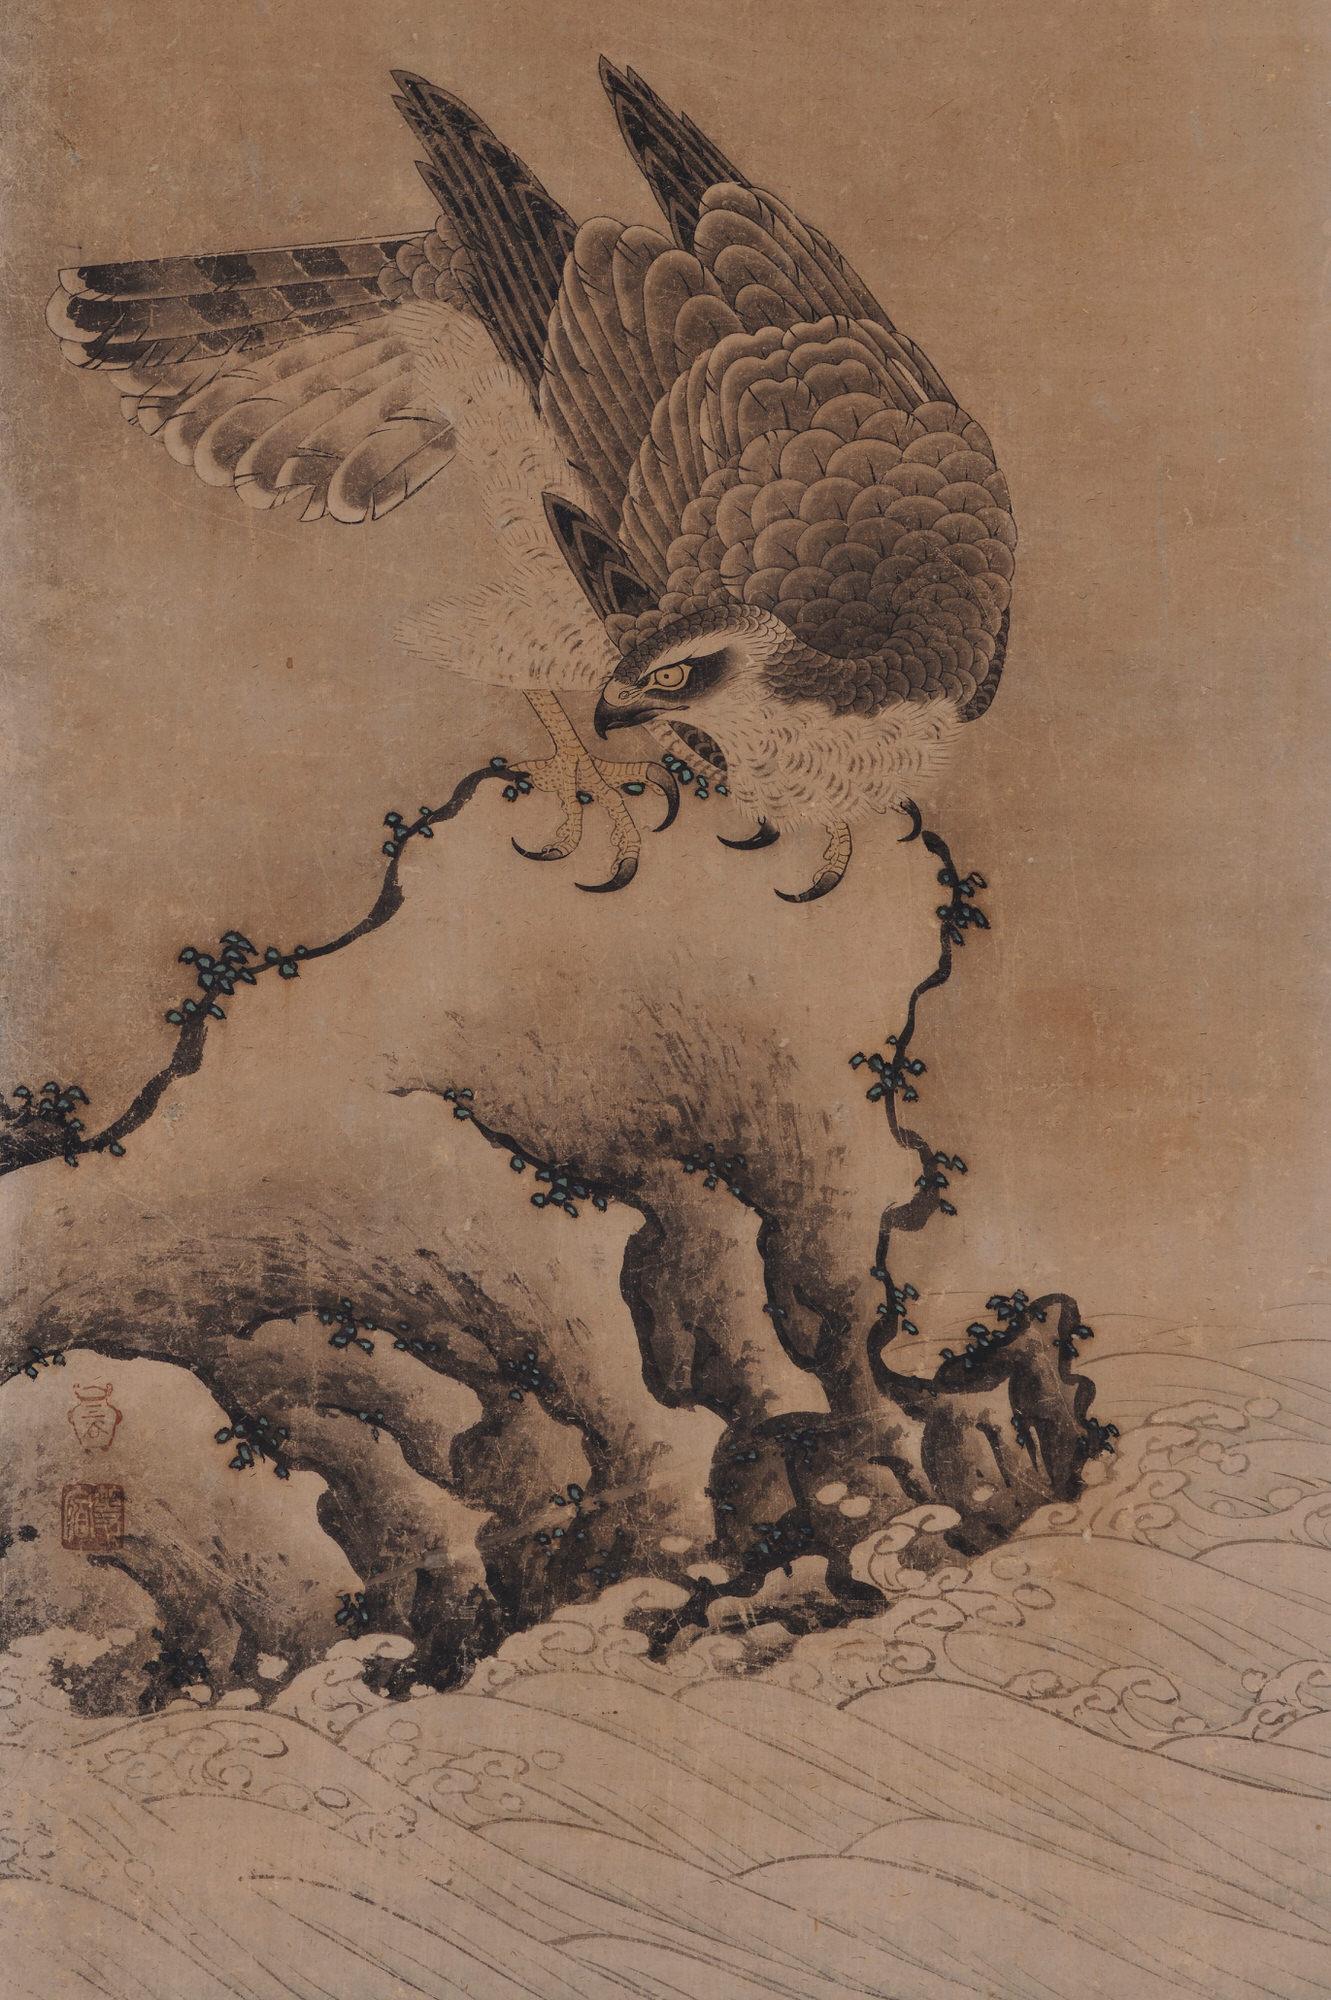 Mitani Toshuku (1577-1654)
“Falcon”
Wall panel, ink and light color on paper.
Upper Seal: Mitani
Lower Seal: Toshuku
Dimensions:
Each 118.5 cm x 51 cm x 2 cm (46.5” x 20” x .75”)

Individual falcon paintings by Mitani Toshuku (1577-1654), an